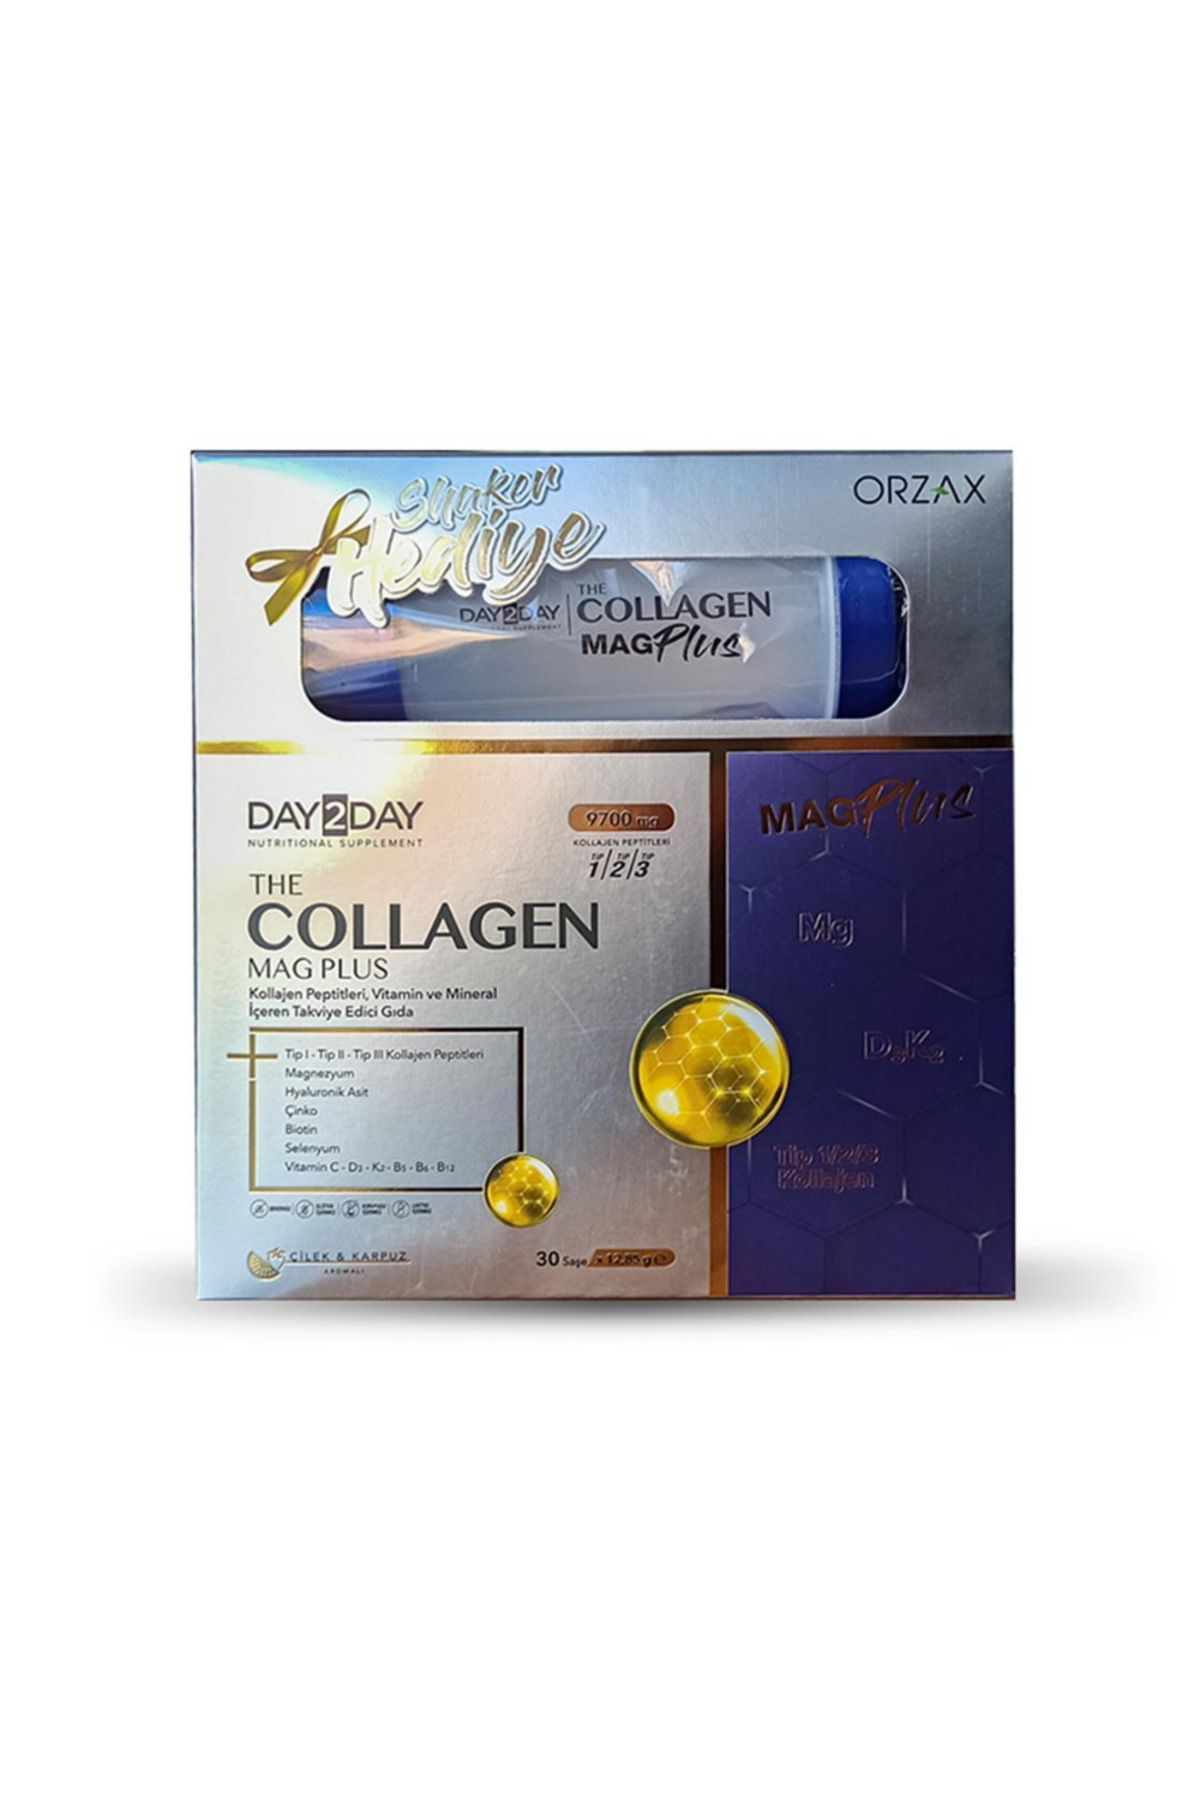 DAY2DAY ORZAX Day2Day The Collagen Mag Plus 30 Saşe+Shaker Hediyeli